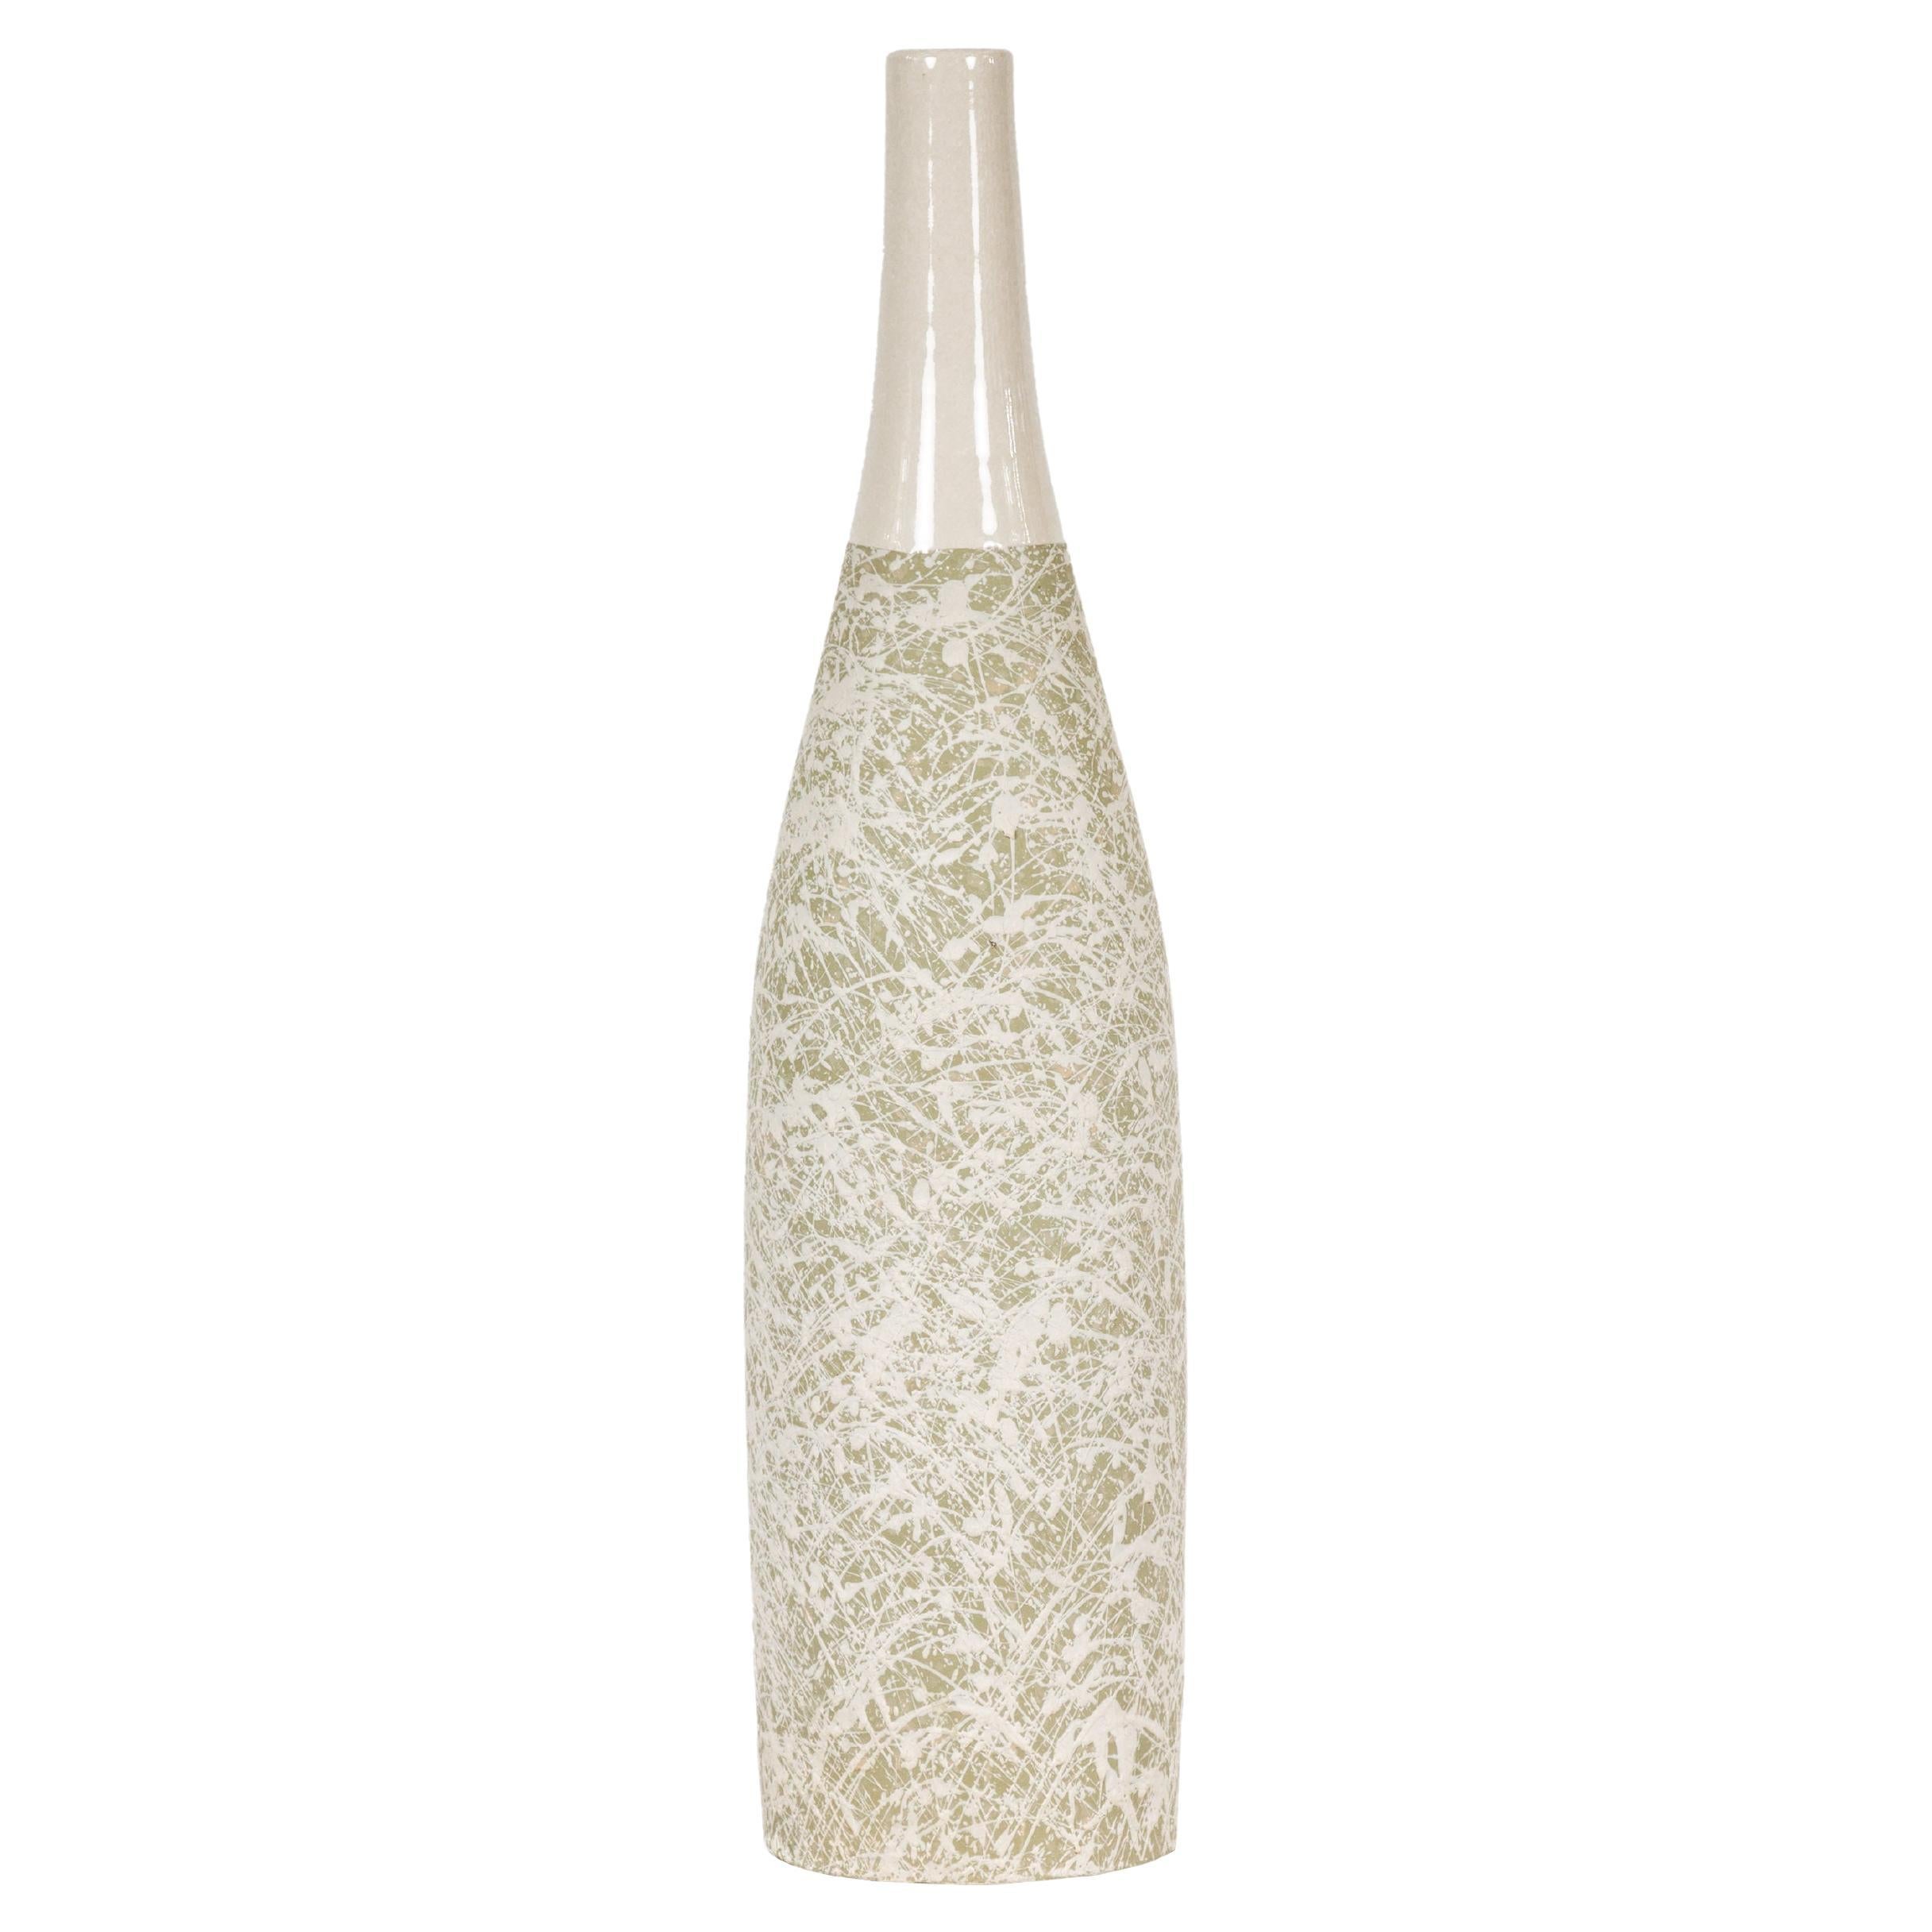 Soft Green and Cream Artisan Ceramic Vase with Energetic Dripping Décor